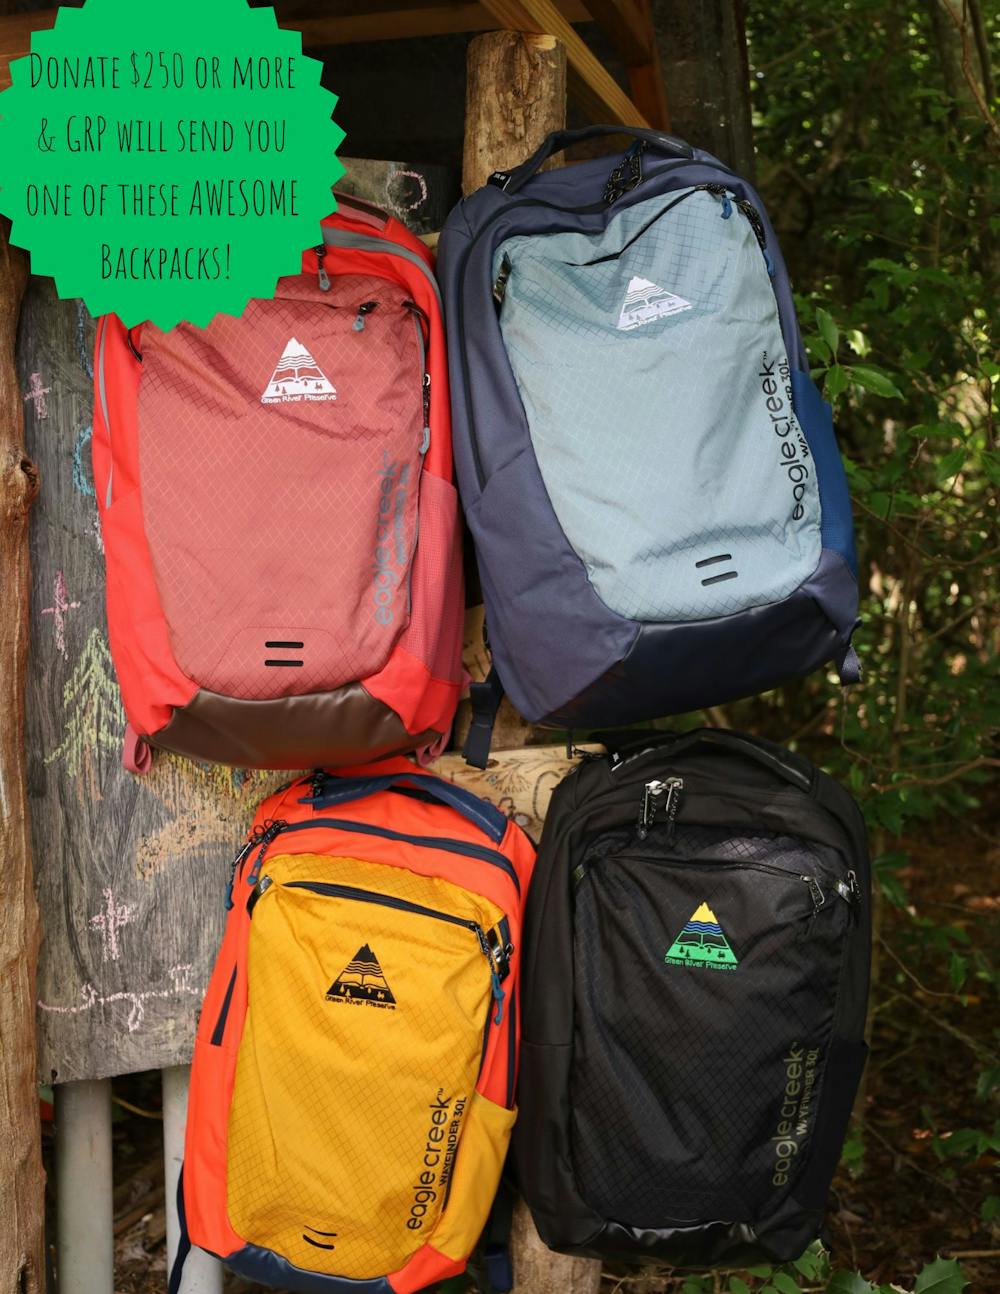 Donate  250 or more   grp will send you one of these awesome backpacks .jpg?ixlib=rails 2.1